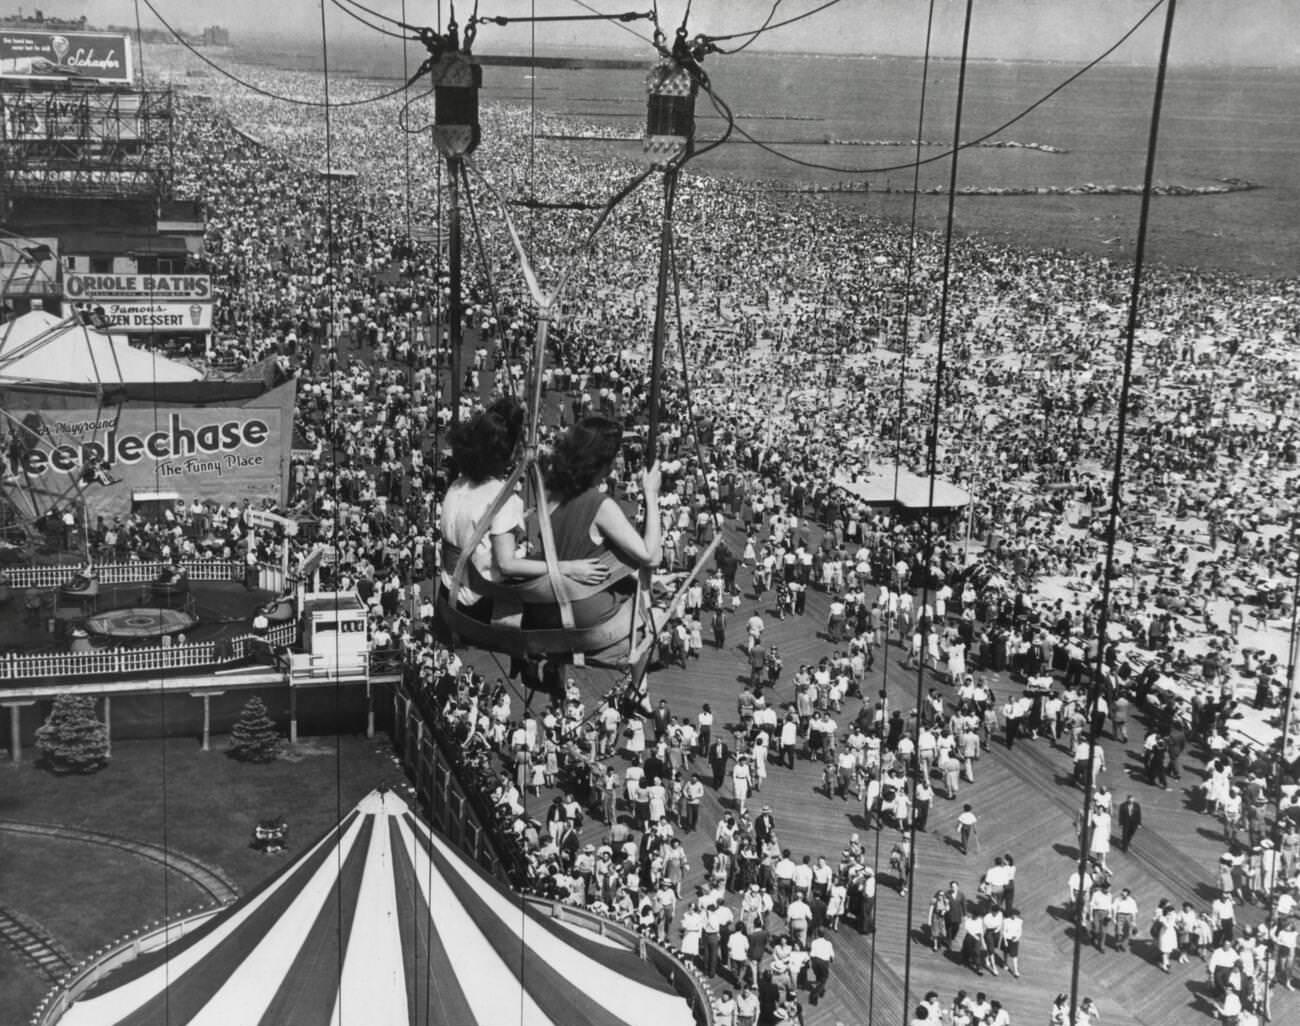 Beach Crowds At Coney Island As Seen From The Parachute Jump, 1950.